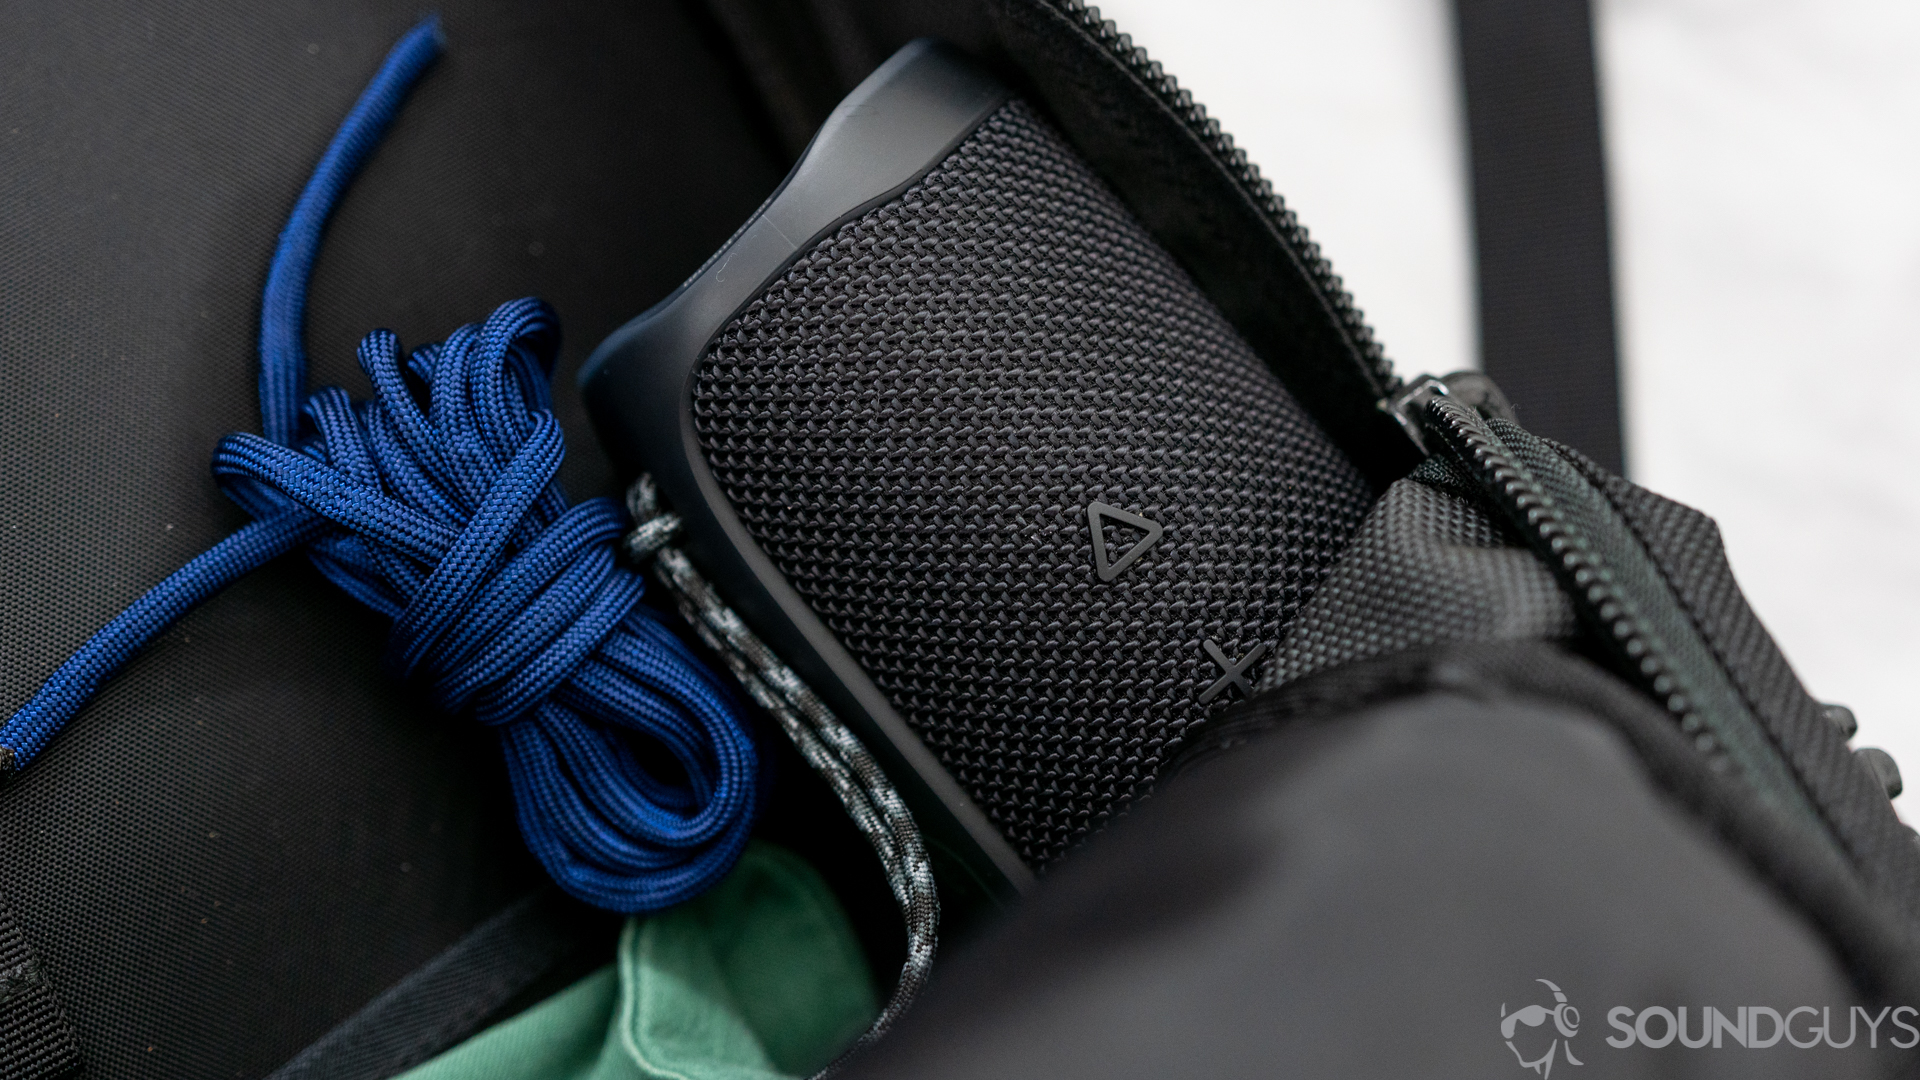 JBL Flip 5 next to blue paracord and green jacket in a black backpack